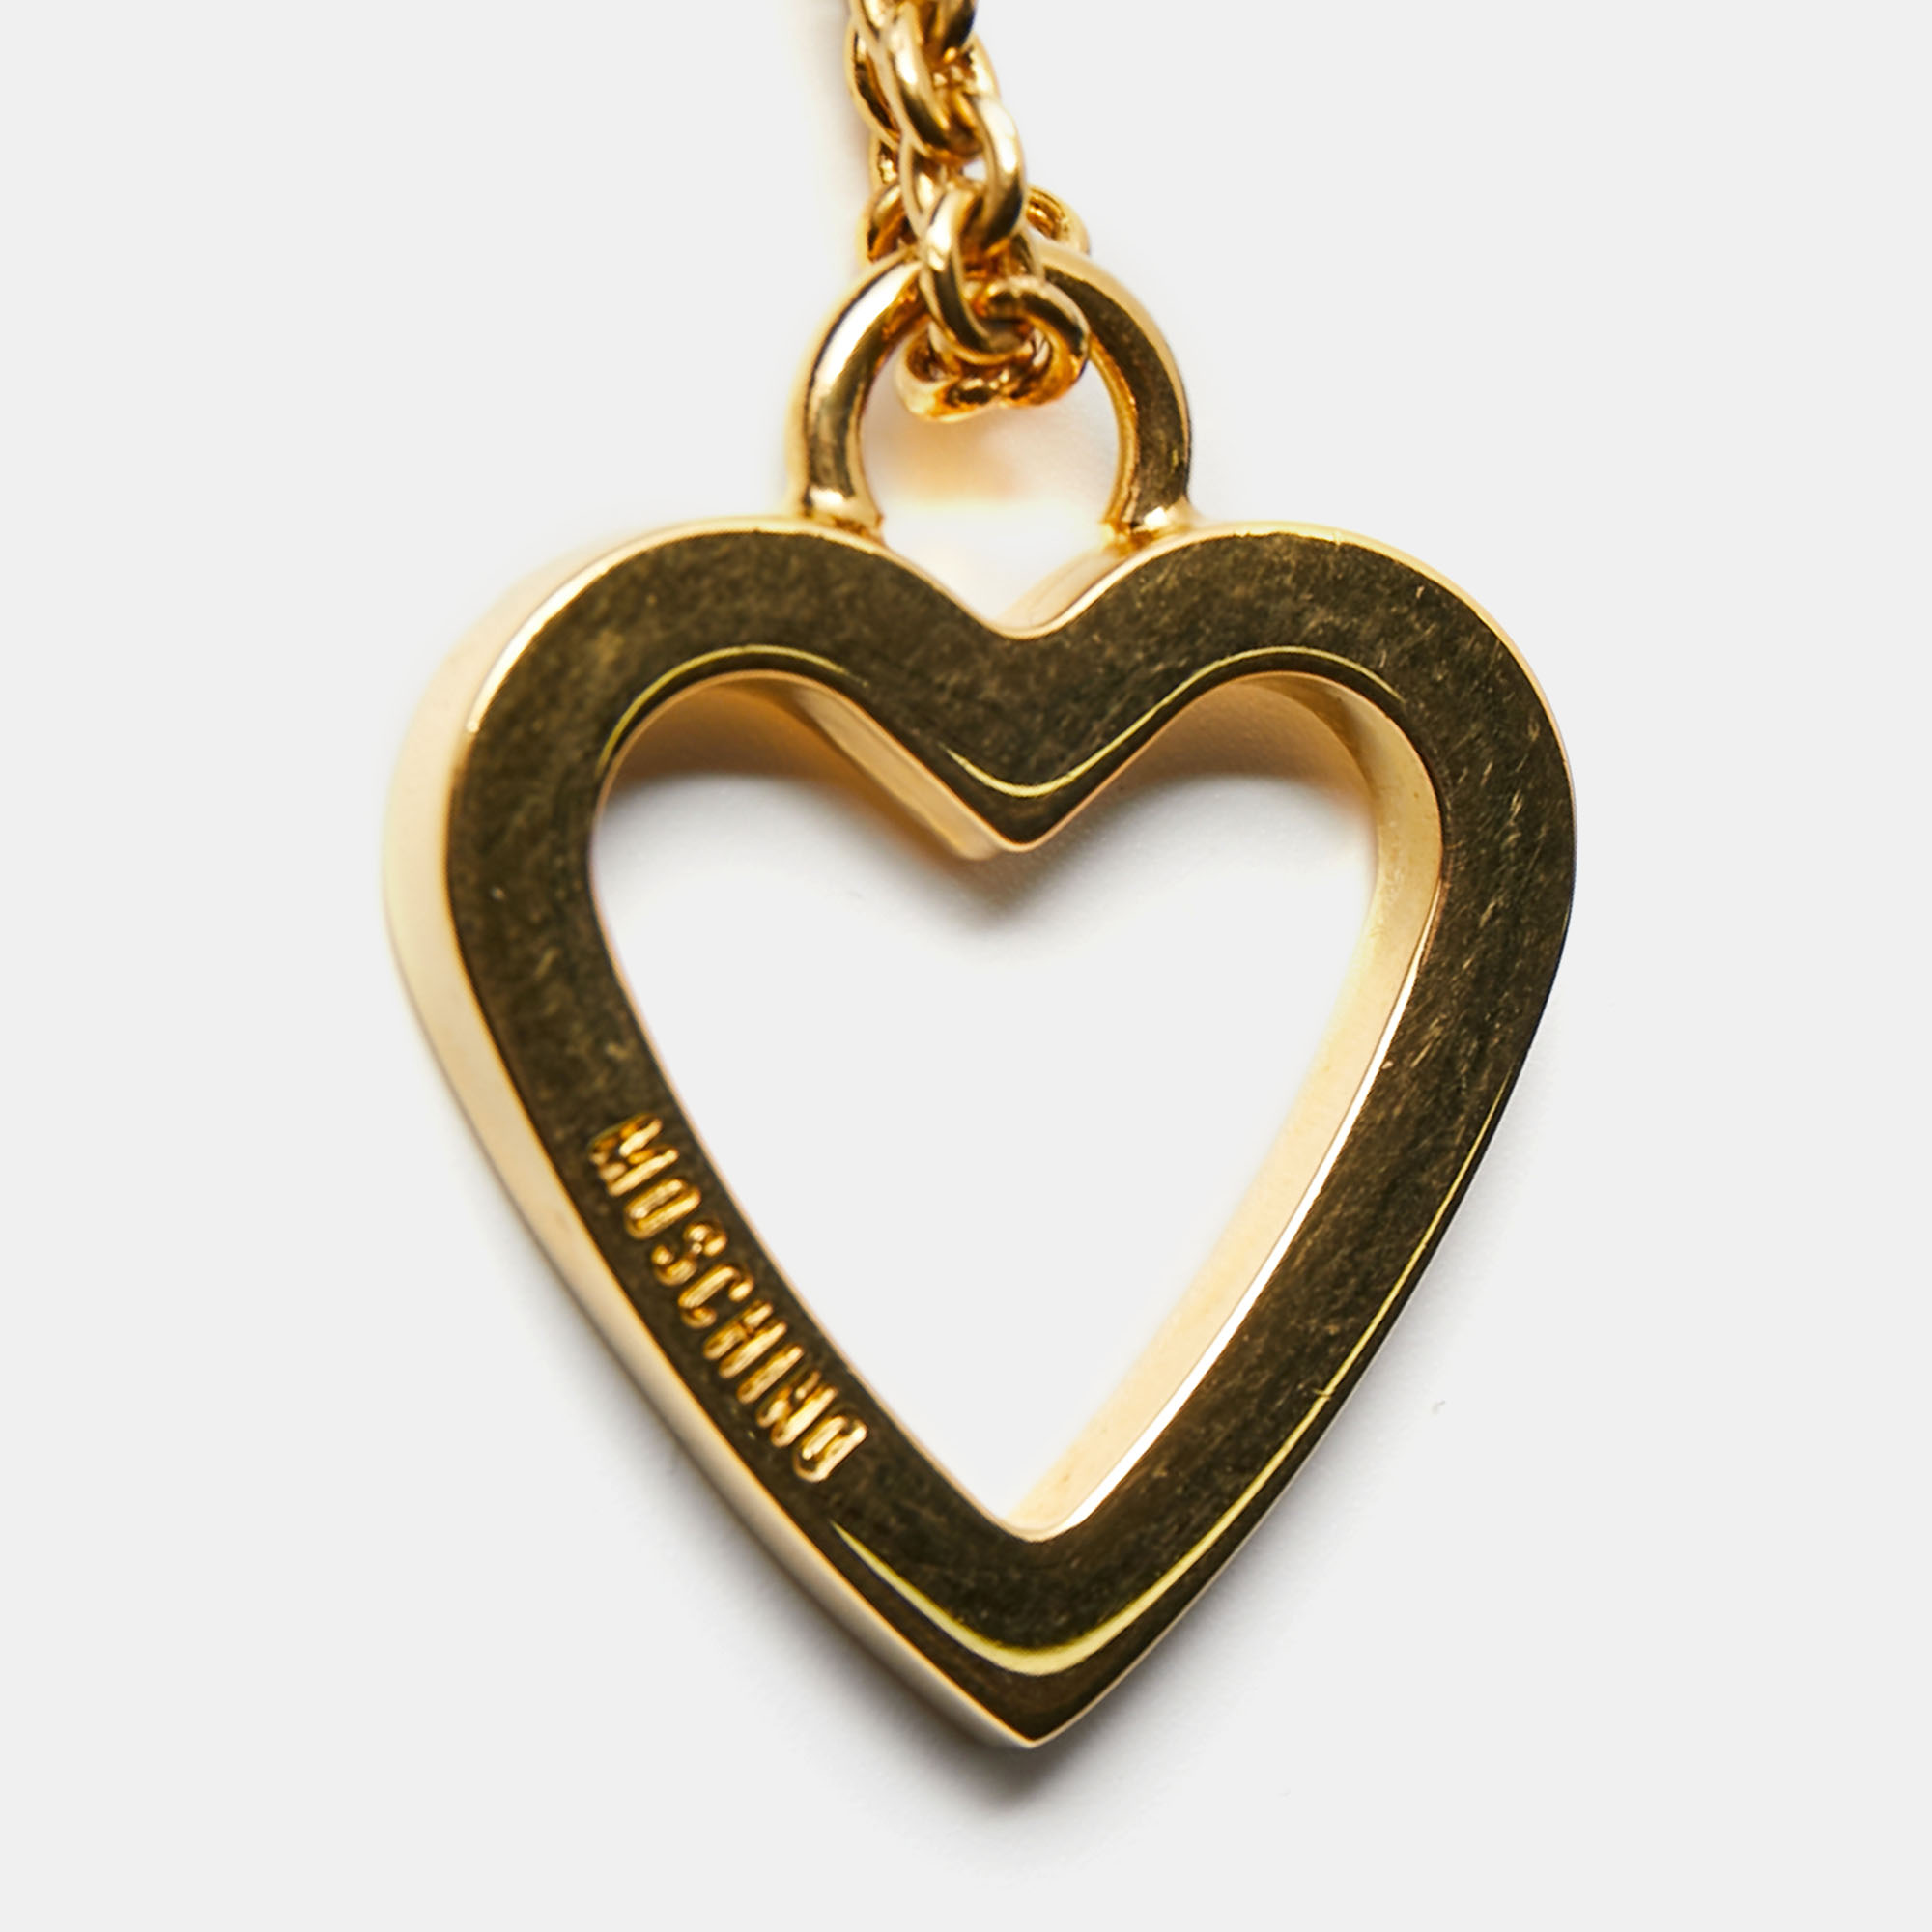 Moschino By Redwell Heart Gold Tone Keyring